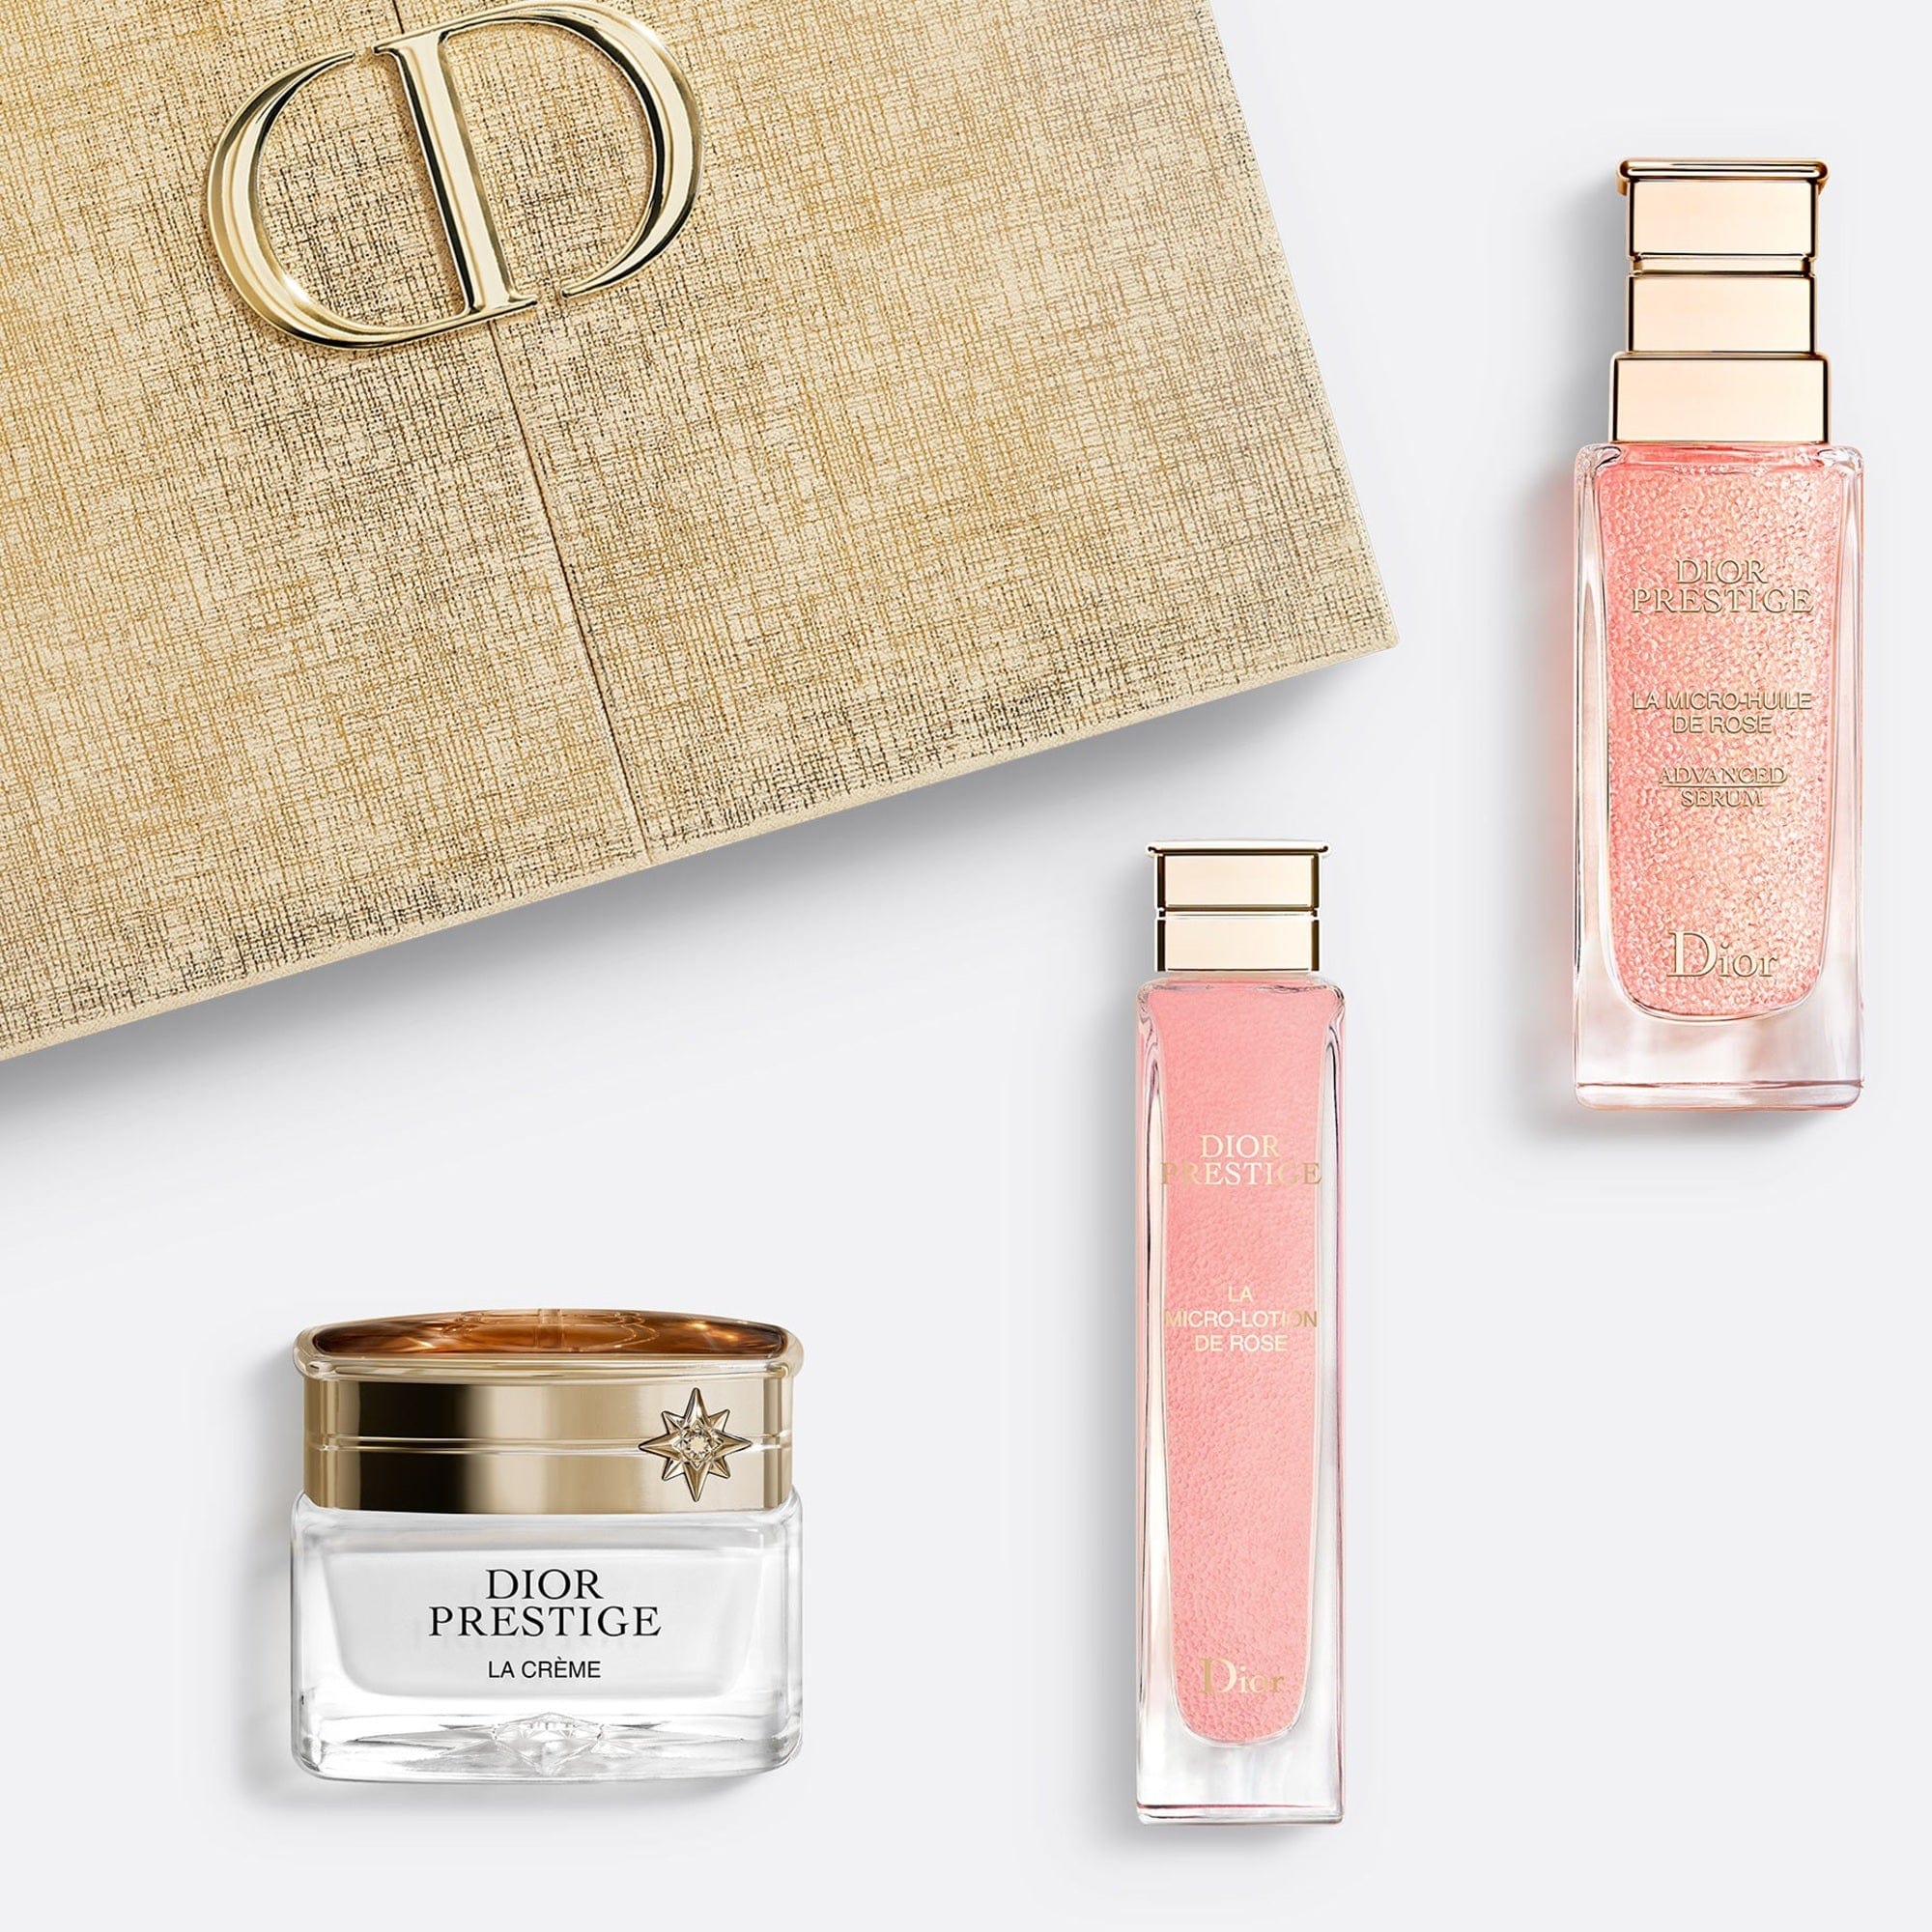 Dior Prestige Regenerating and Perfecting Skincare Gift Set | Serum, Lotion and Age-Defying Cream